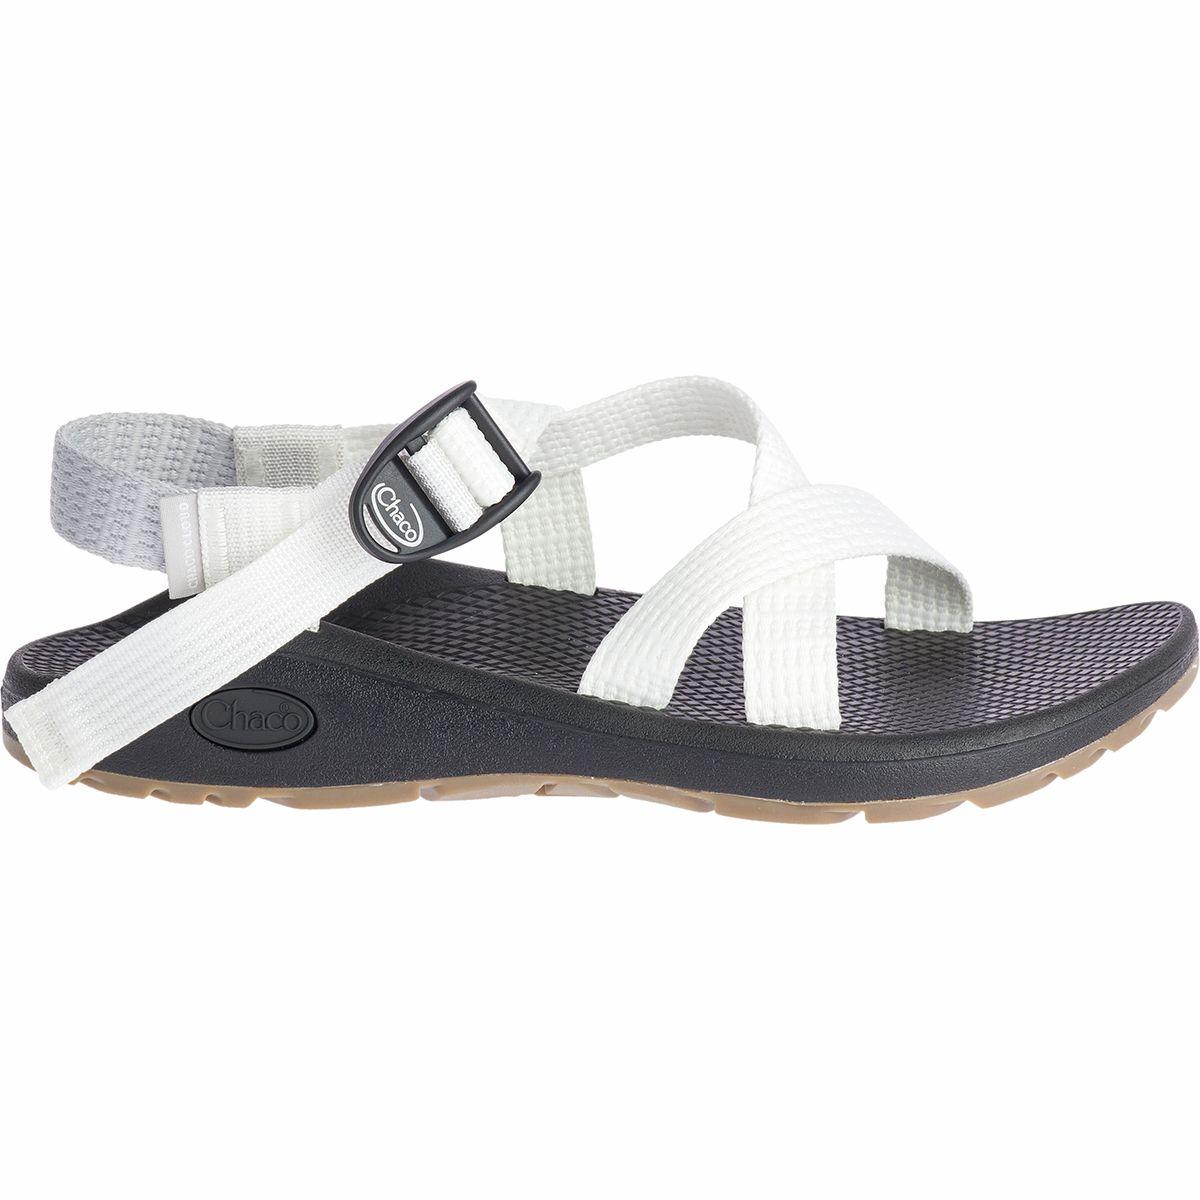 Chaco Synthetic Z/cloud Sandal in White - Lyst